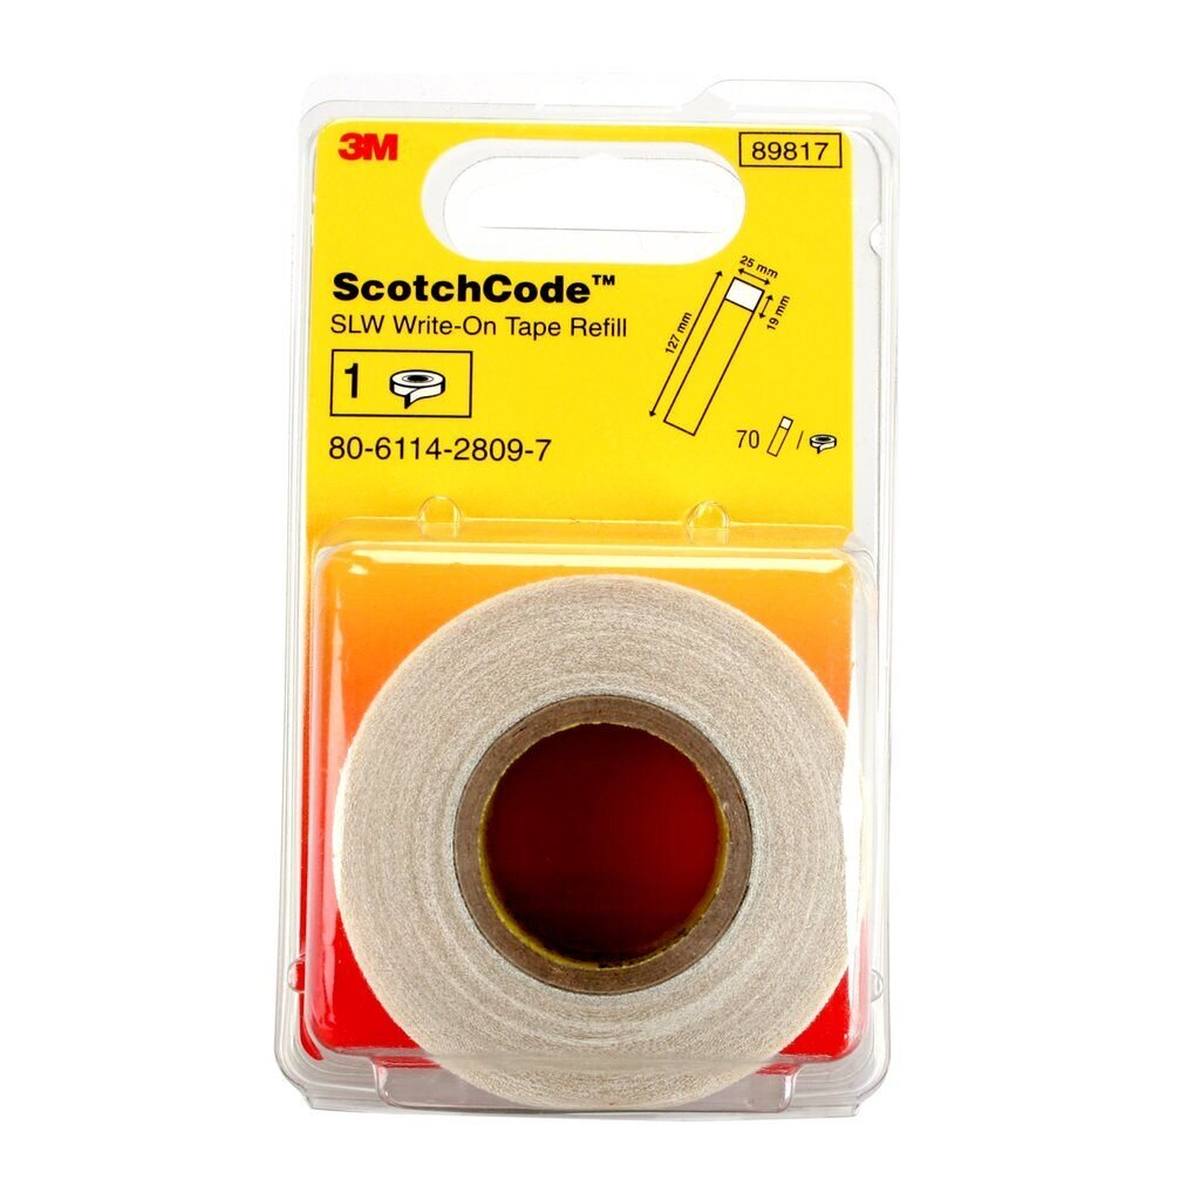 3M ScotchCode SLW-R refill rolls for SLW cable markers